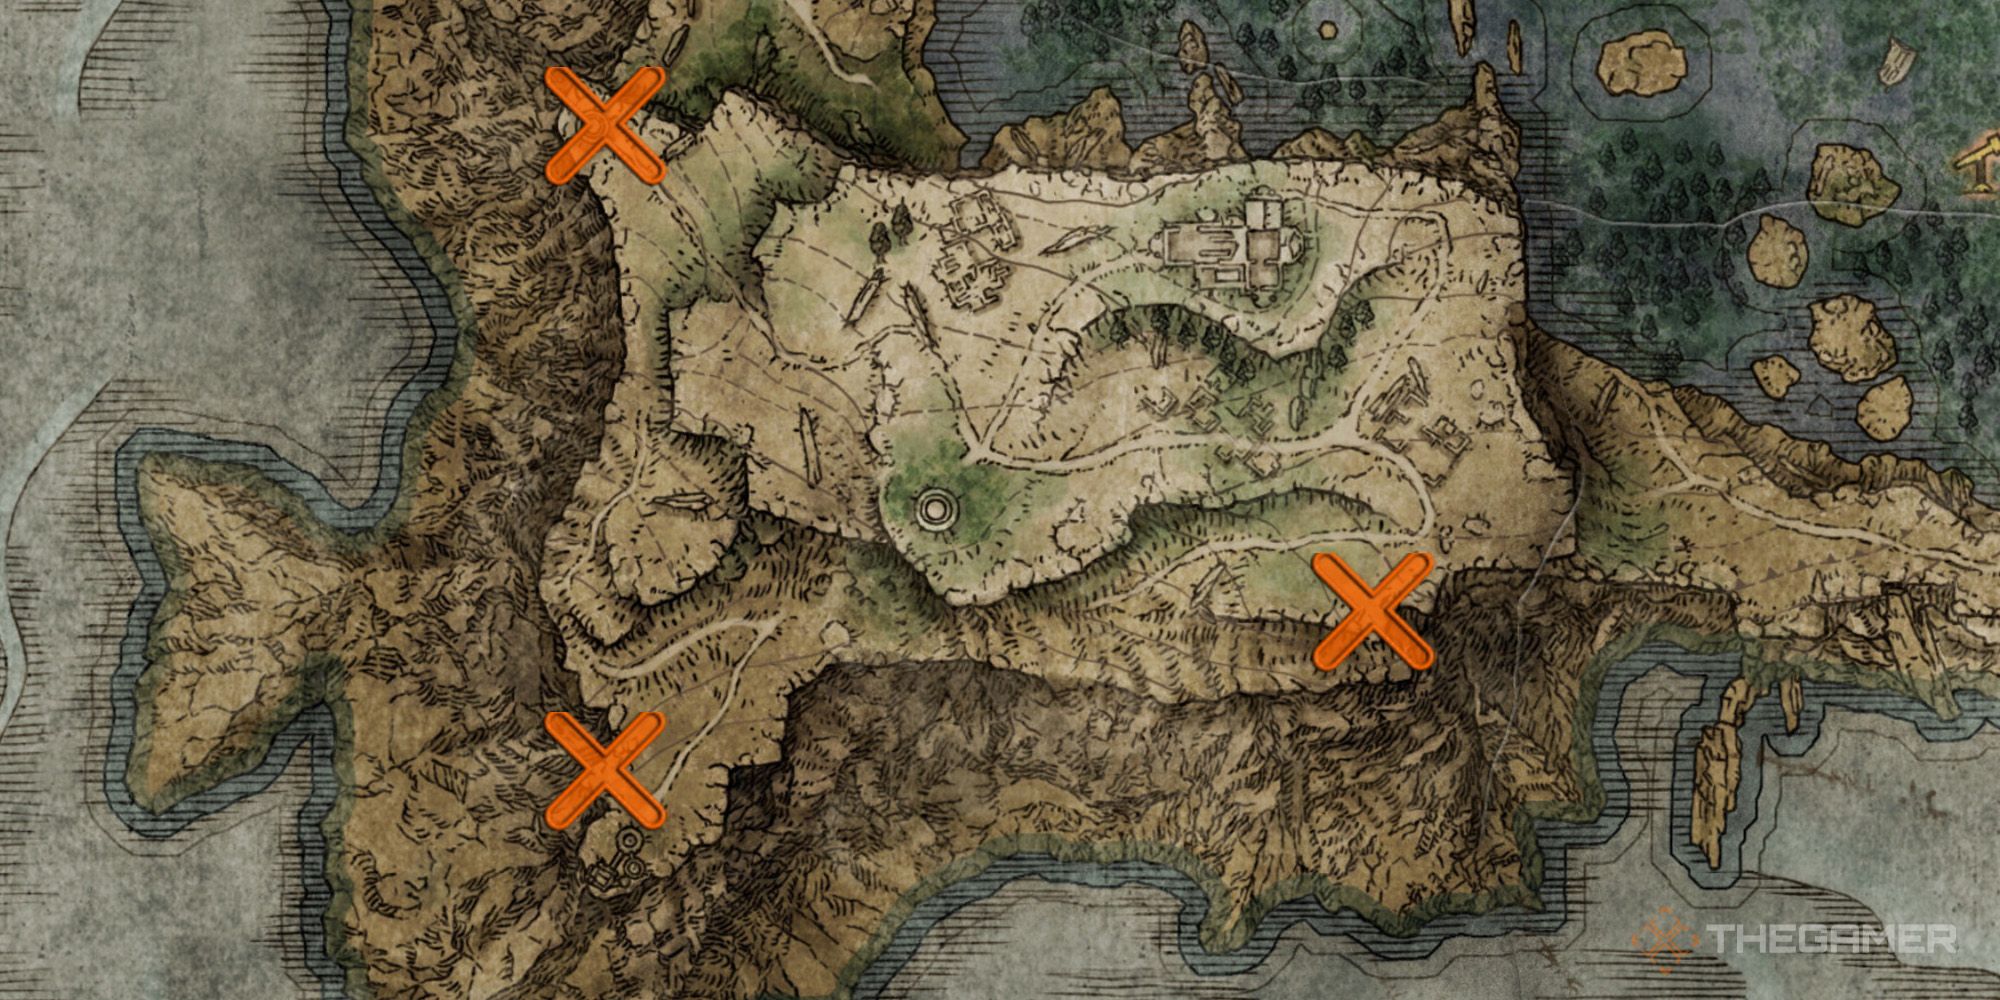 Map showing the locations of the ghostly turtles for the Stars of Ruin spell in Elden Ring